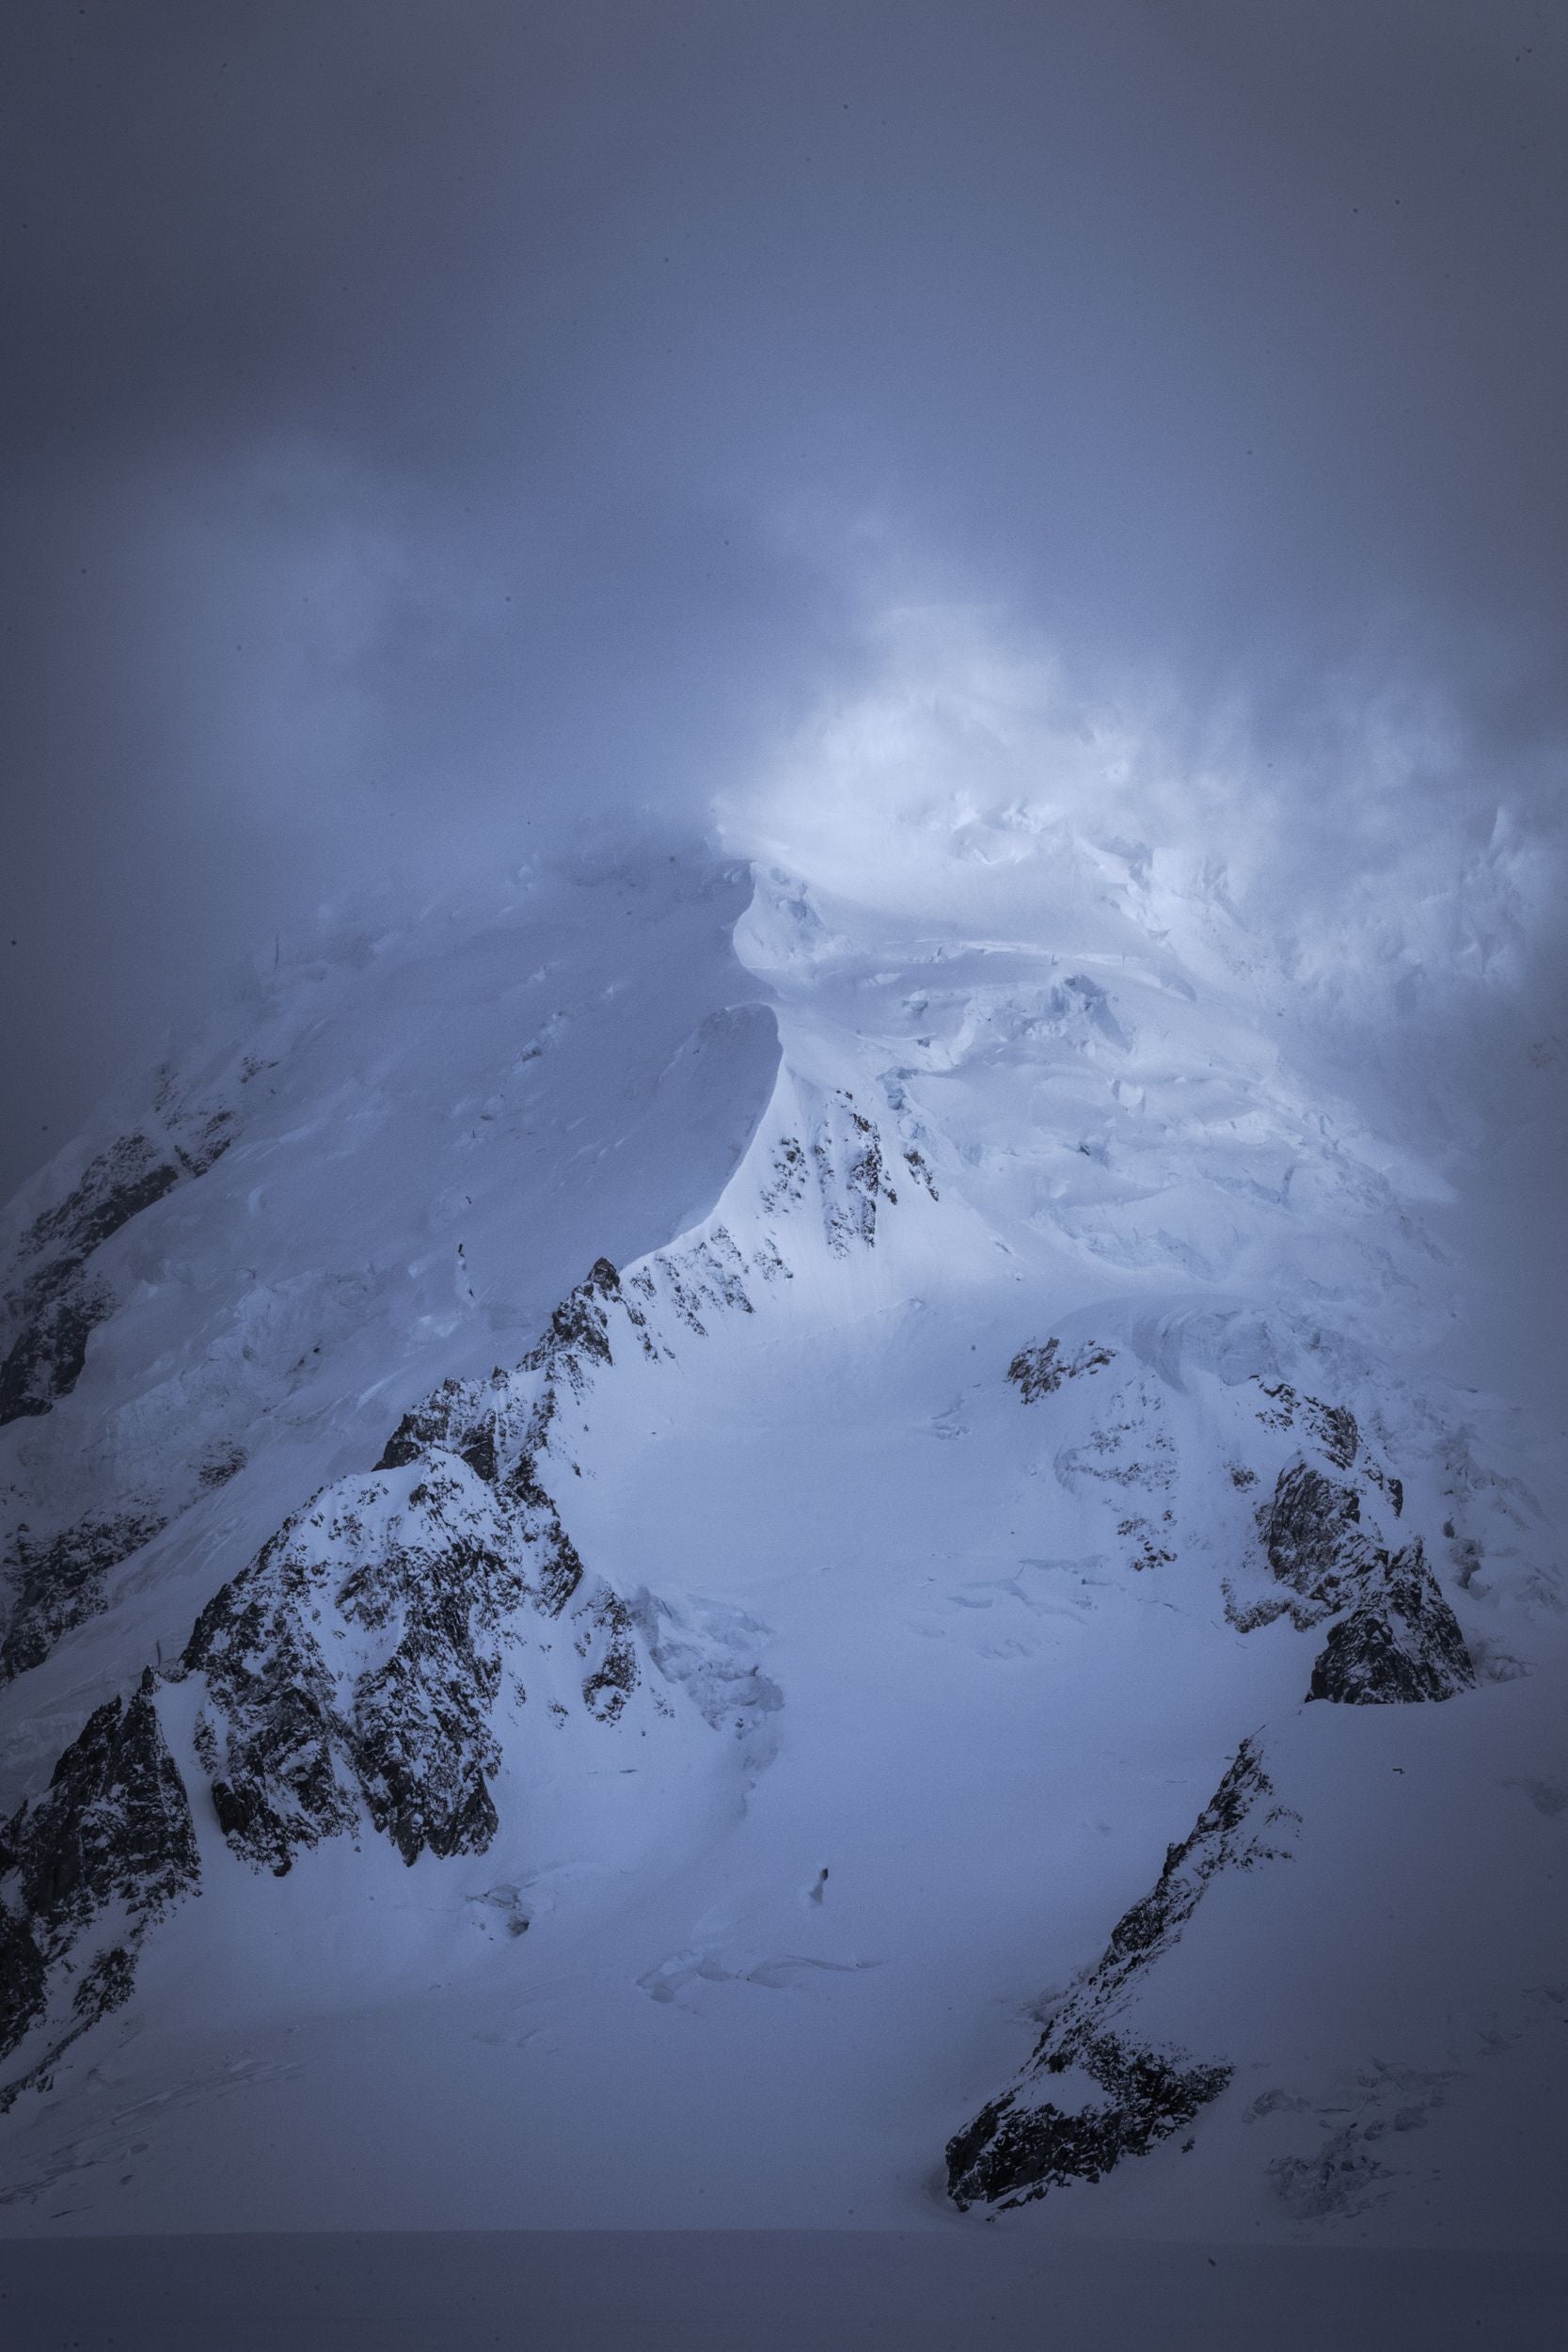 Fog and clouds hide a snow covered mountain peak and its ridge.